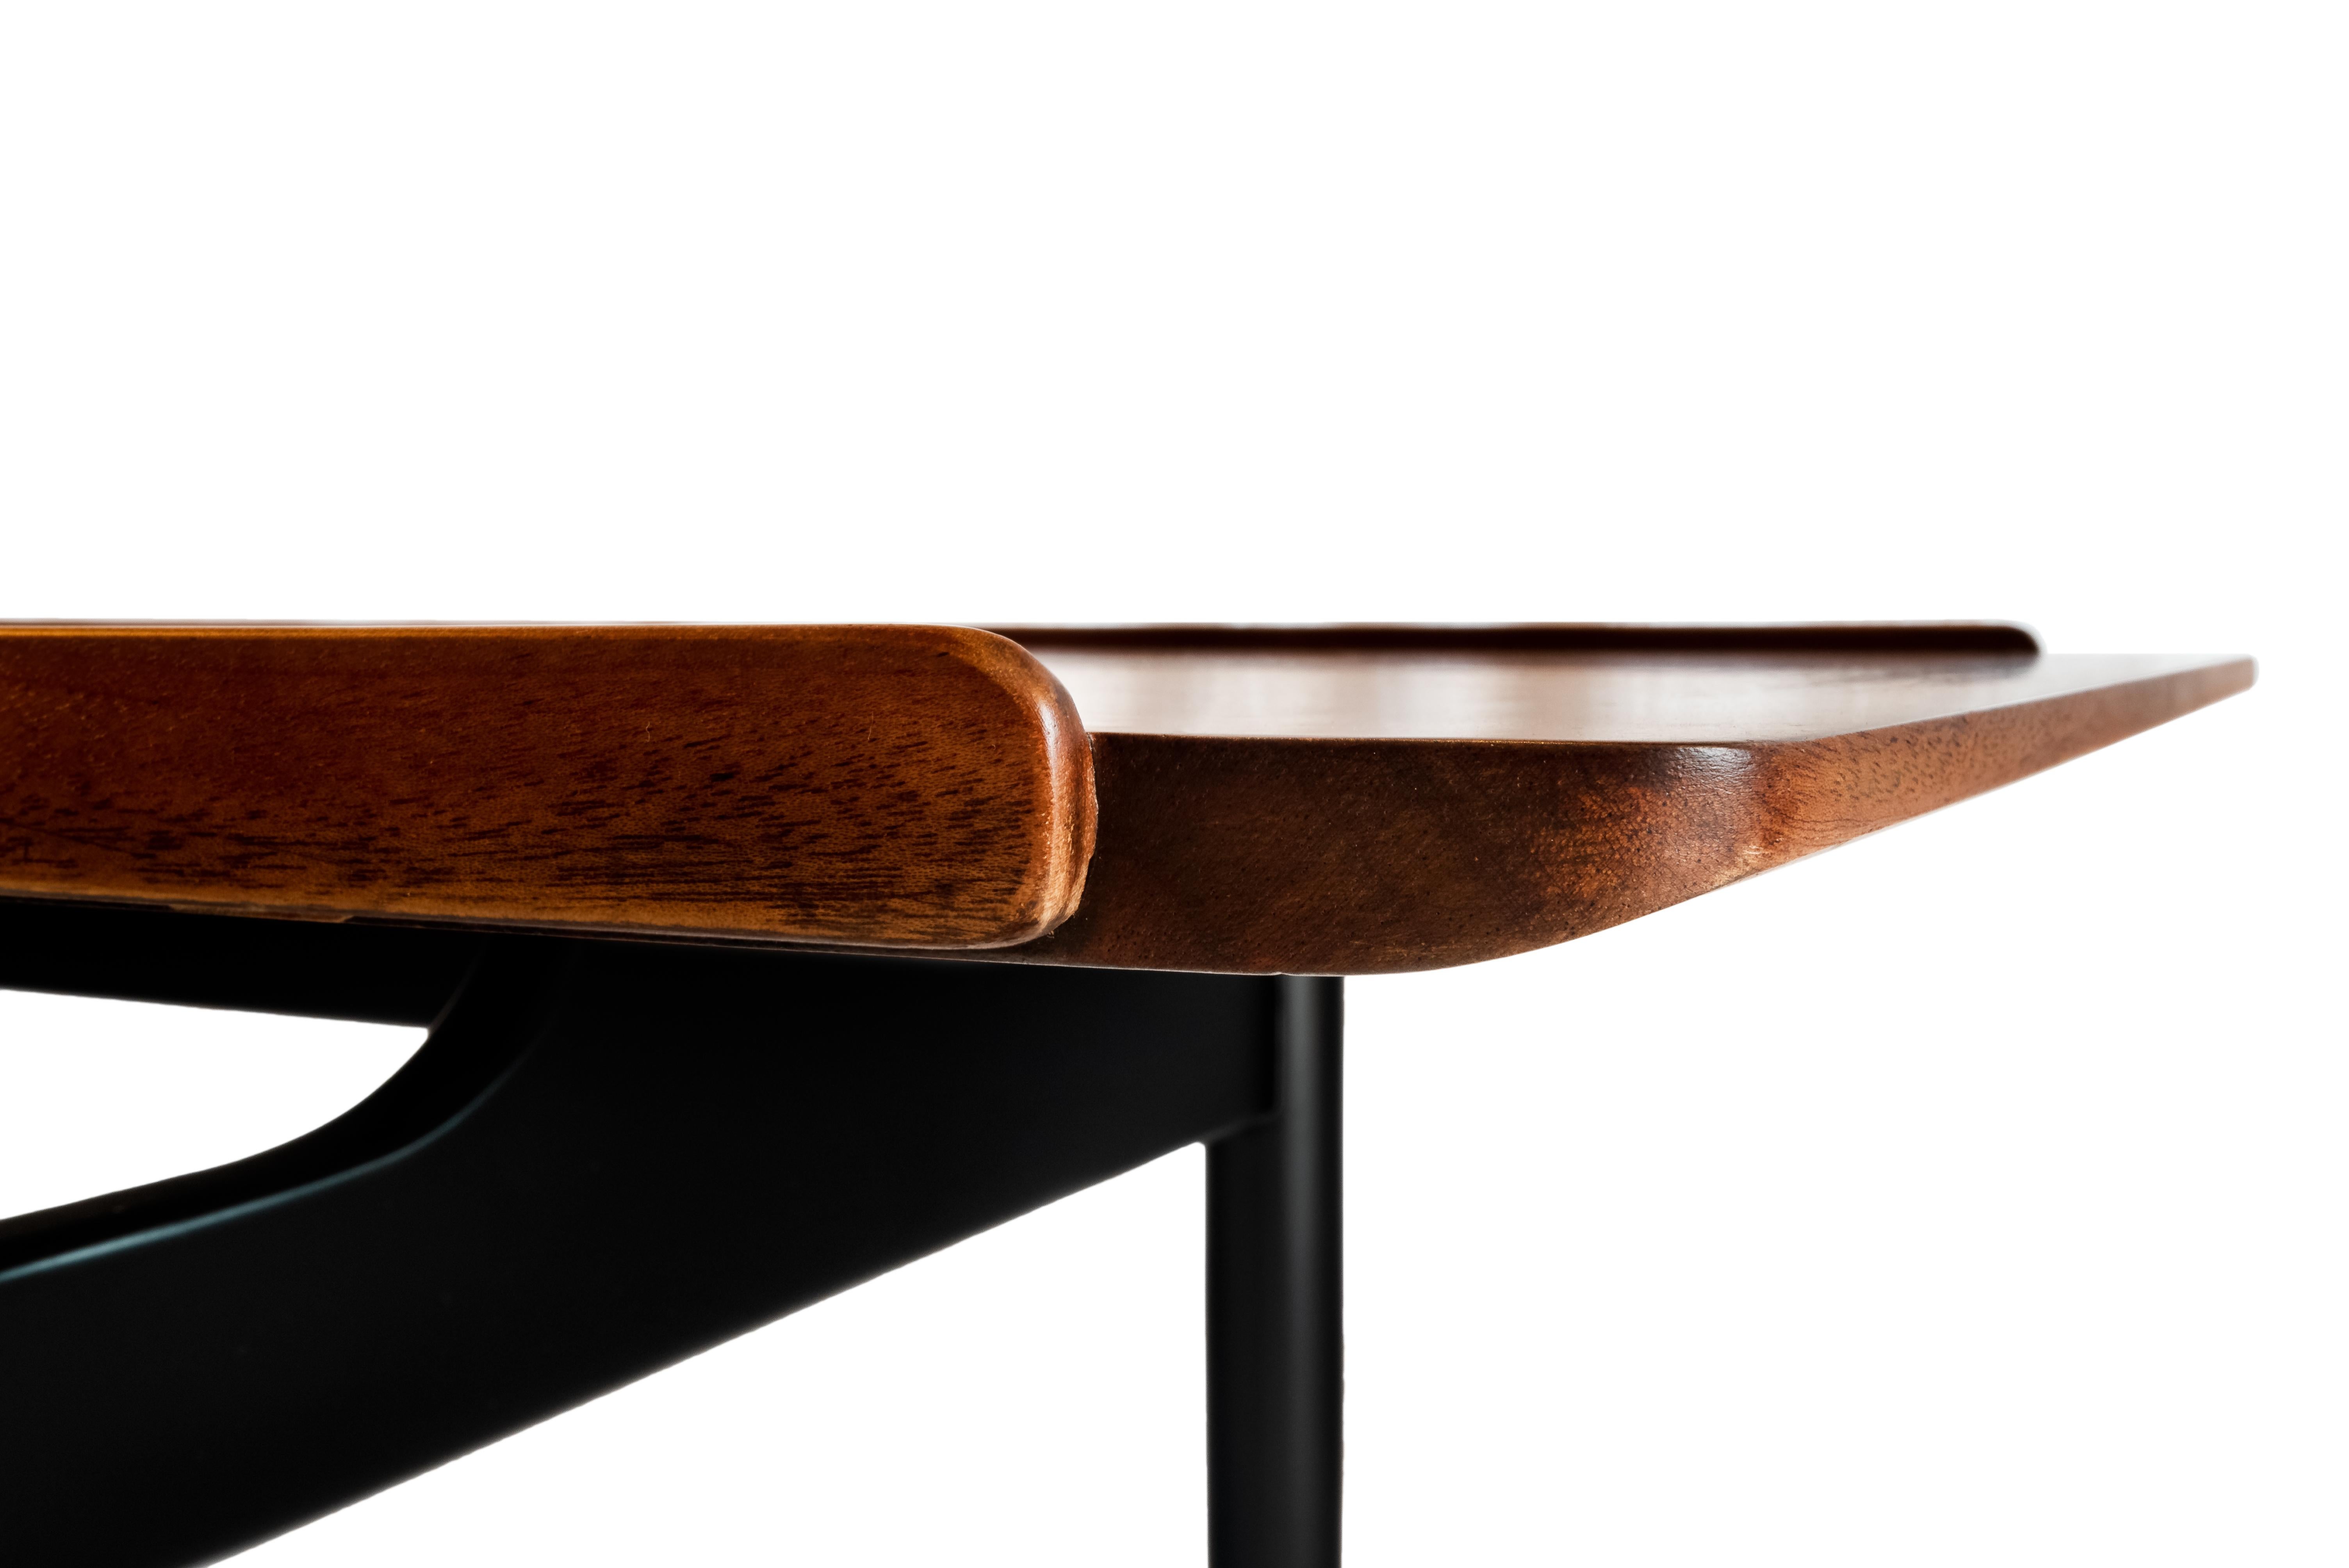 Lacquered Mid-Century Modern Bubinga Wood Coffee Table Attributed to Jens Risom, 1950s